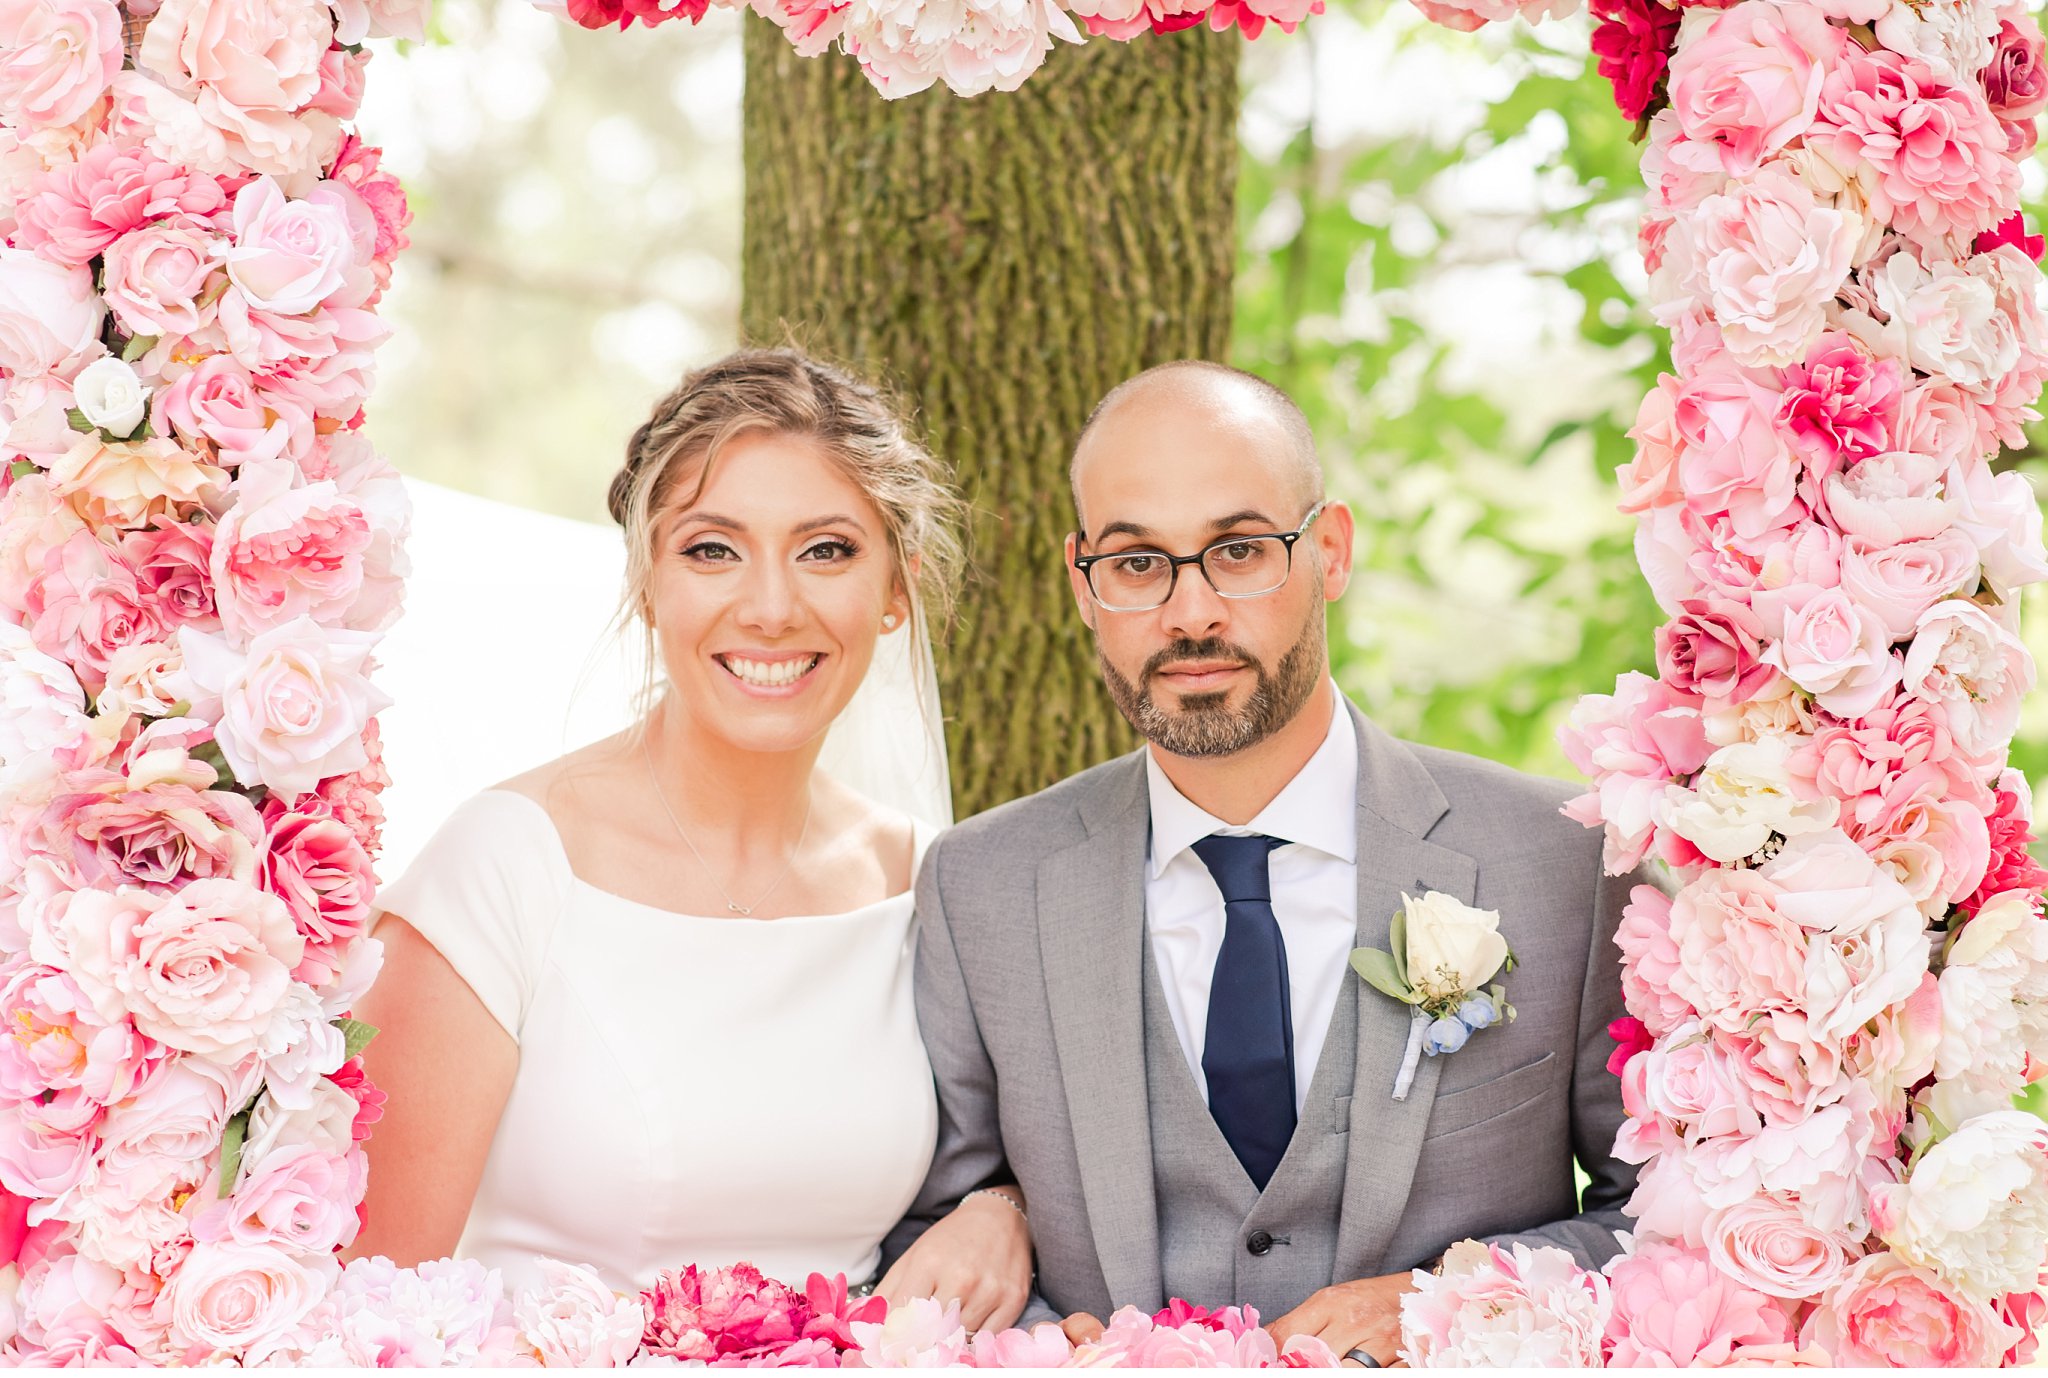 bride and groom with a floral photo frame